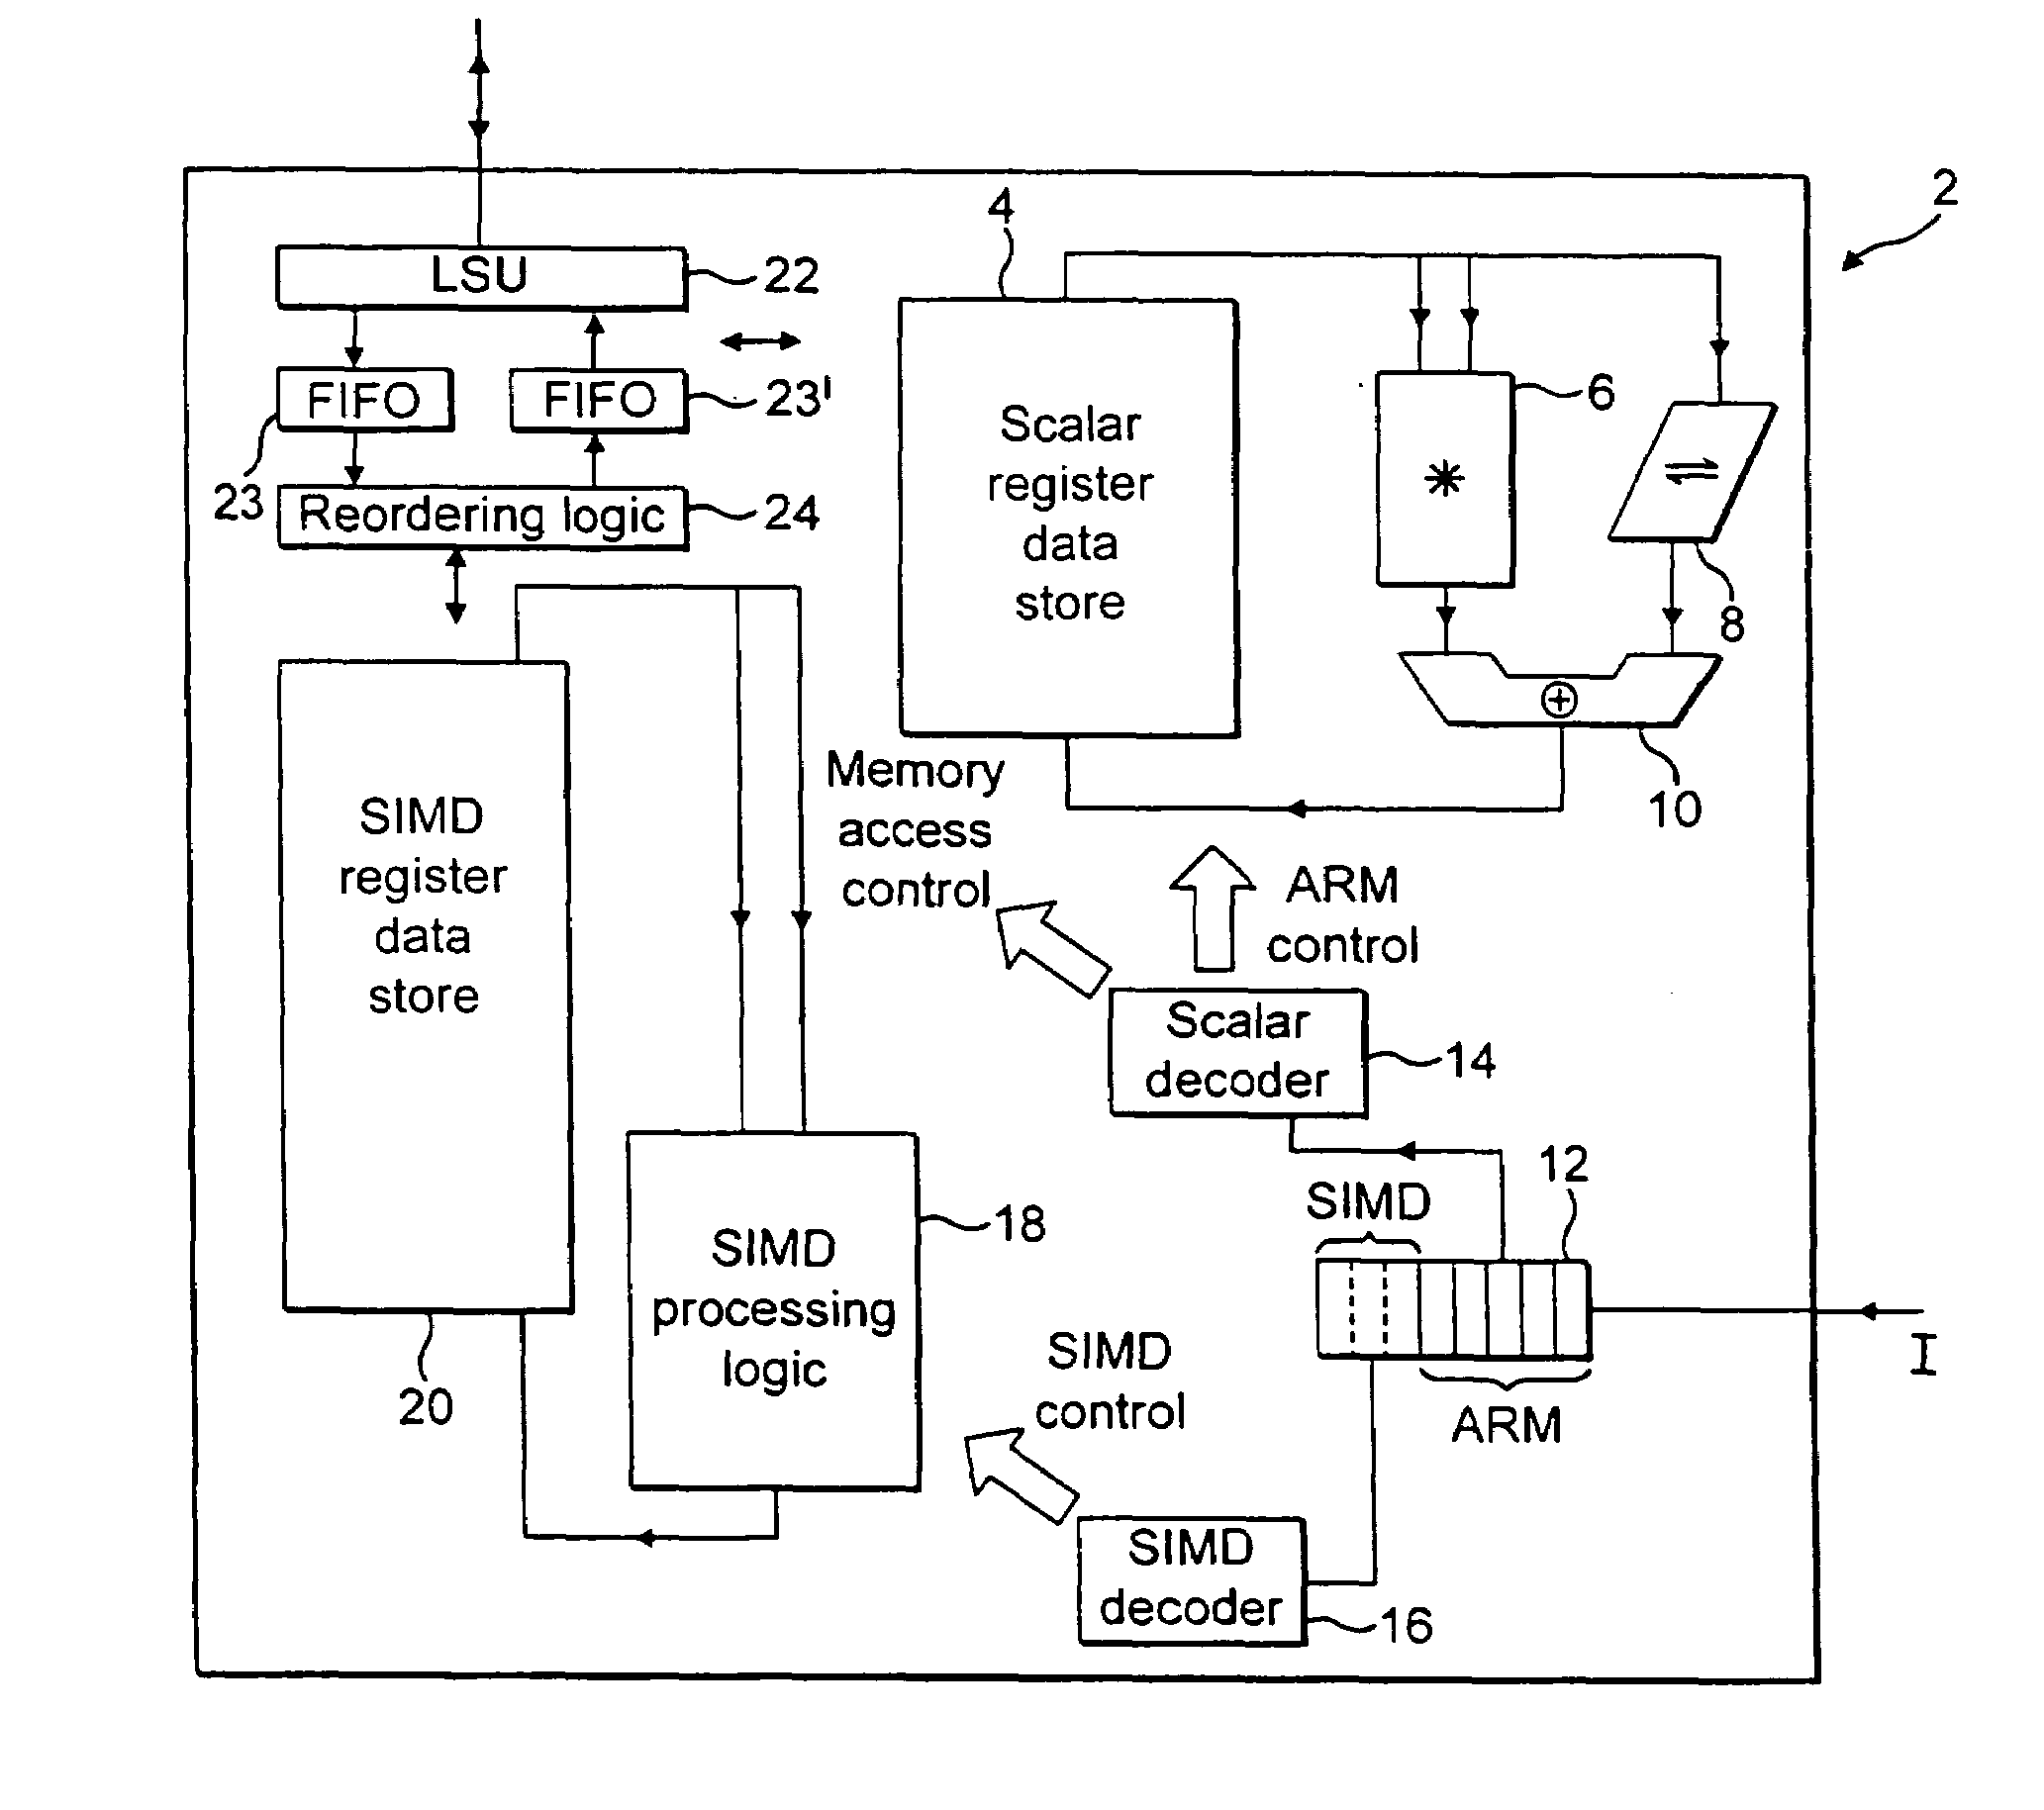 Data processing apparatus and method for moving data elements between a chosen lane of parallel processing in registers and a structure within memory